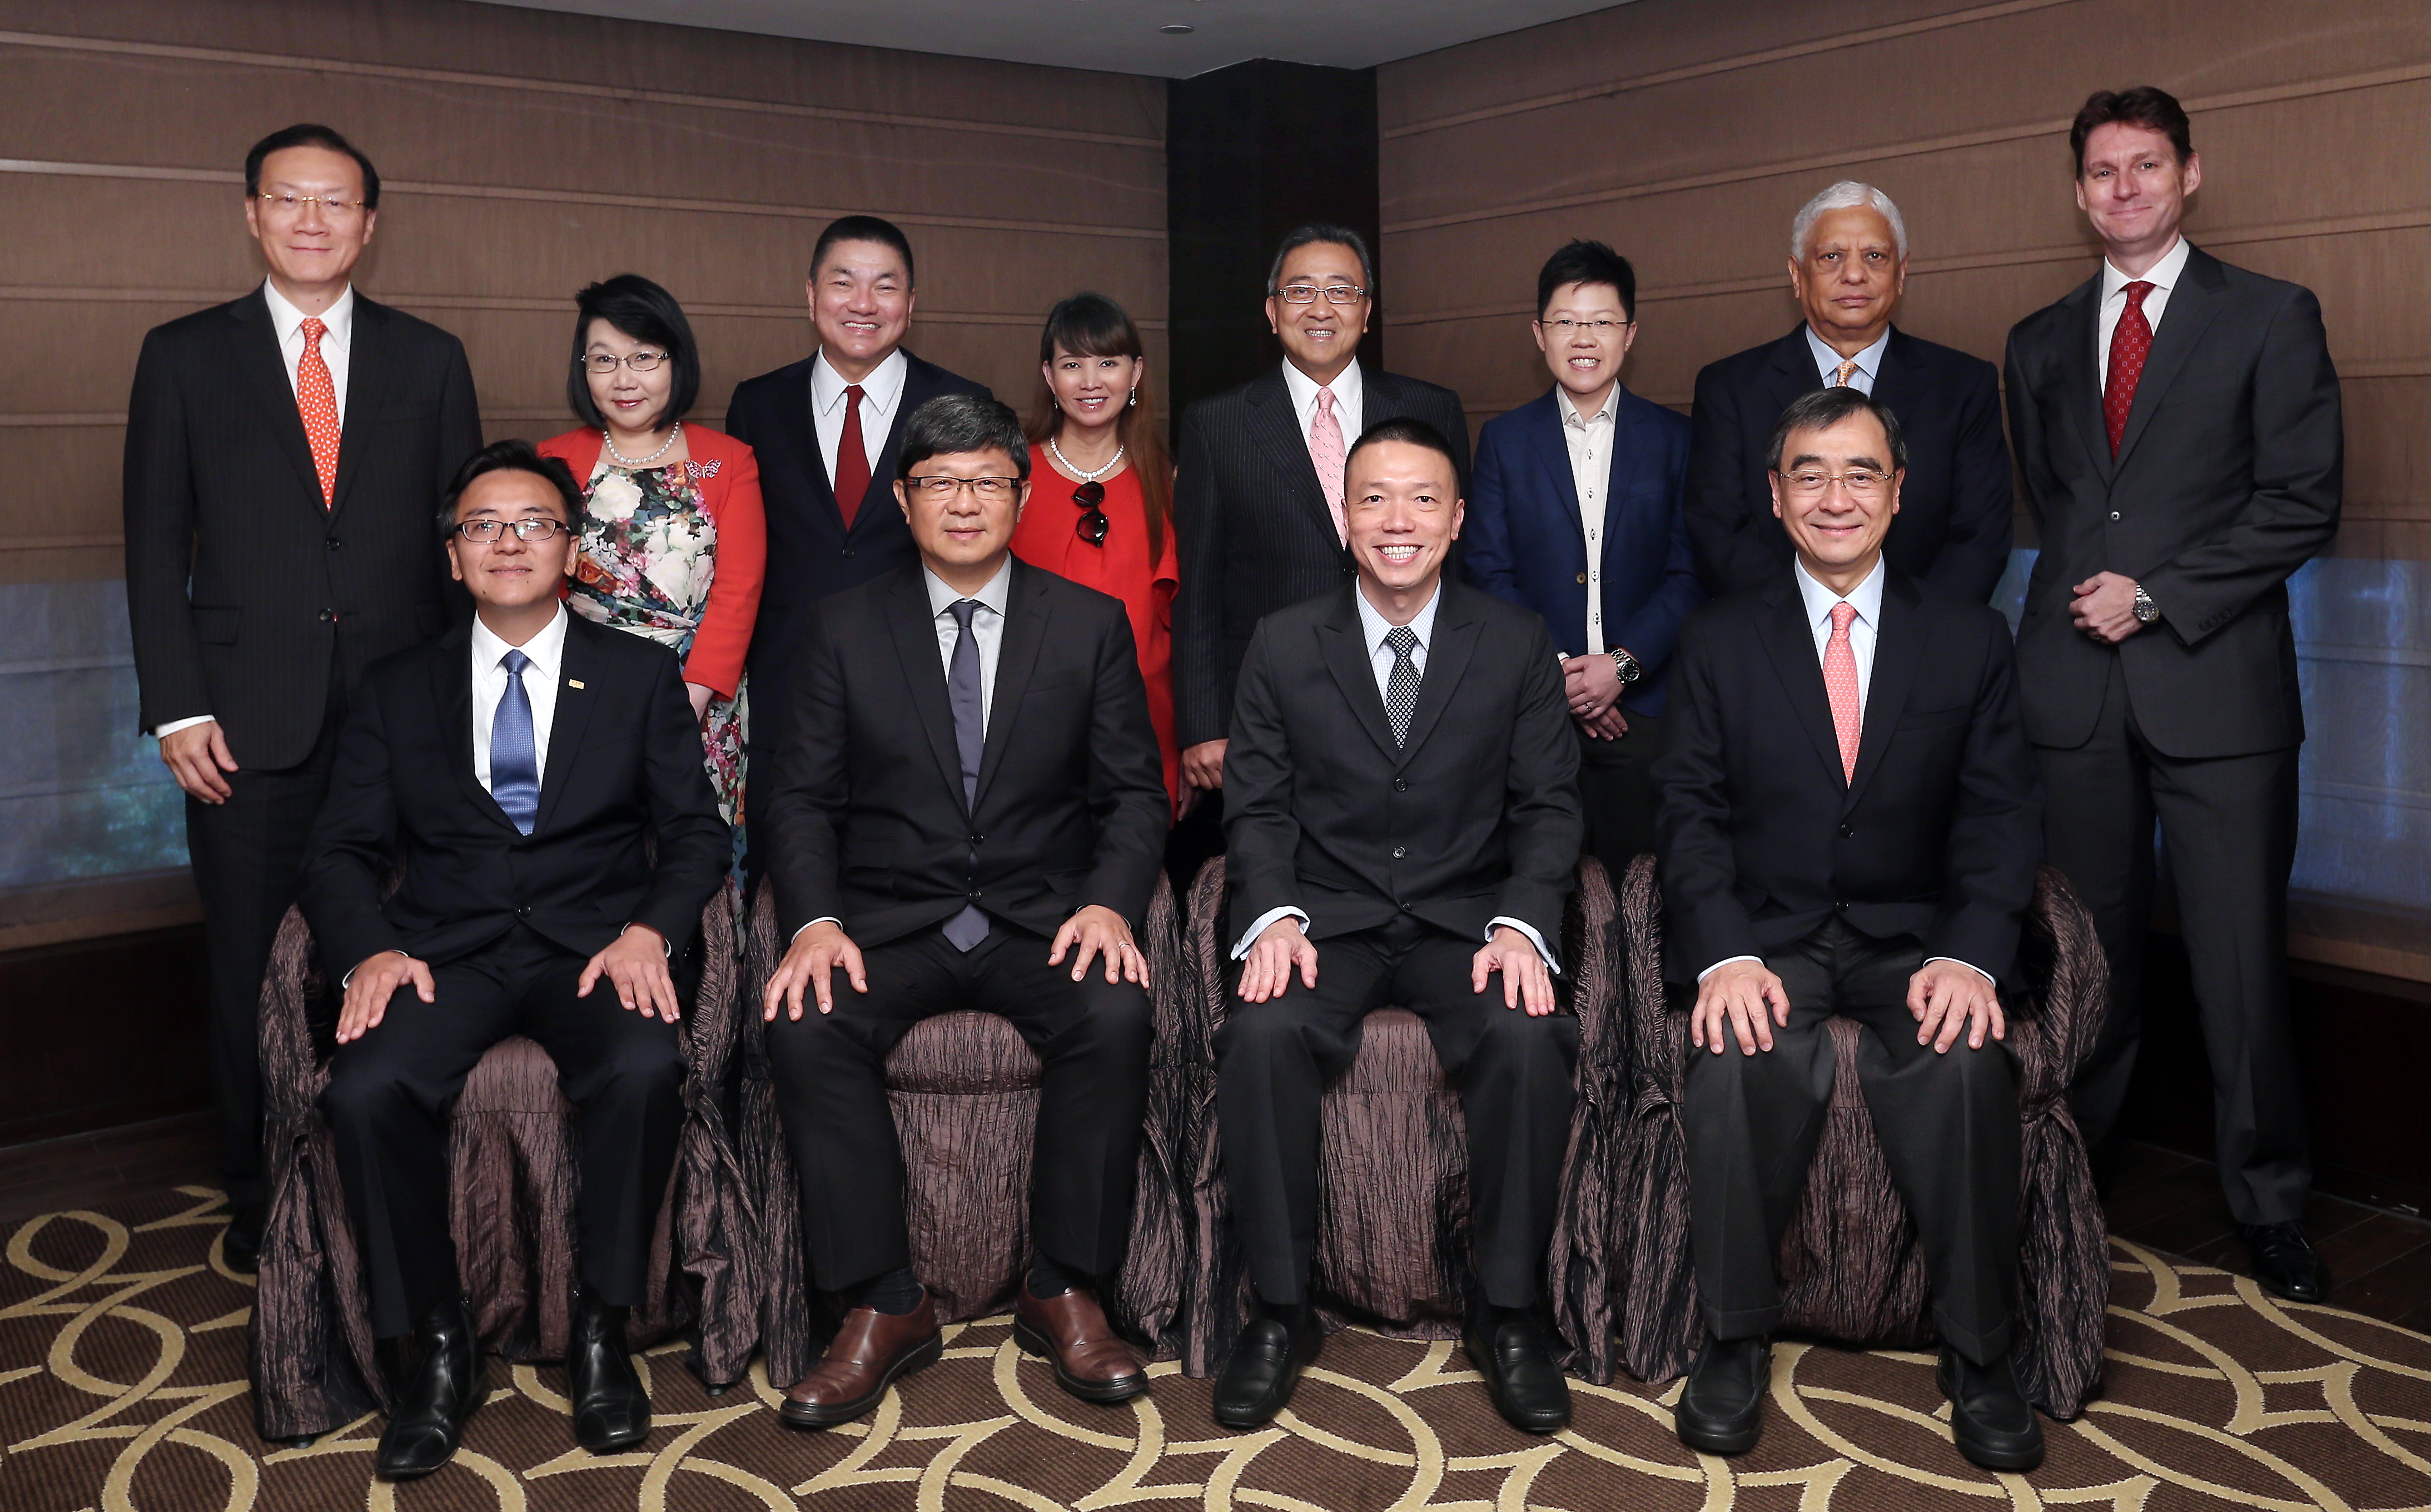 The judges for the awards include (seated, from left) Kenneth Chen, the divisional president for Greater China of CPA Australia; Robin Hu, the chief executive of SCMP Group; Ken Lee, the executive vice-president, commercial, Asia-Pacific, and managing director, Hong Kong and Macau, at DHL Express; Richard Wong, the professor of economics and Philip Wong Kennedy Wong professor in political economy at the University of Hong Kong; (back row, from left)  Albert Chan, the head of commercial banking at HSBC; Janice Choi, a director of the Chinese General Chamber of Commerce; Cheah Cheng Hye, the chairman and co-chief investment officer at Value Partners; Joyce Tsang, the chairman and chief executive of Modern Beauty Salon Holdings; Song Hoi-see, the founder and chief executive of Plaza Premium Lounge Management; Philic Man, a director of Global Investigation & Security Consultancy; Manu Melwani, the owner of Sam's Tailor; and South China Morning Post business editor Nick Edwards. Photo: K.Y. Cheng